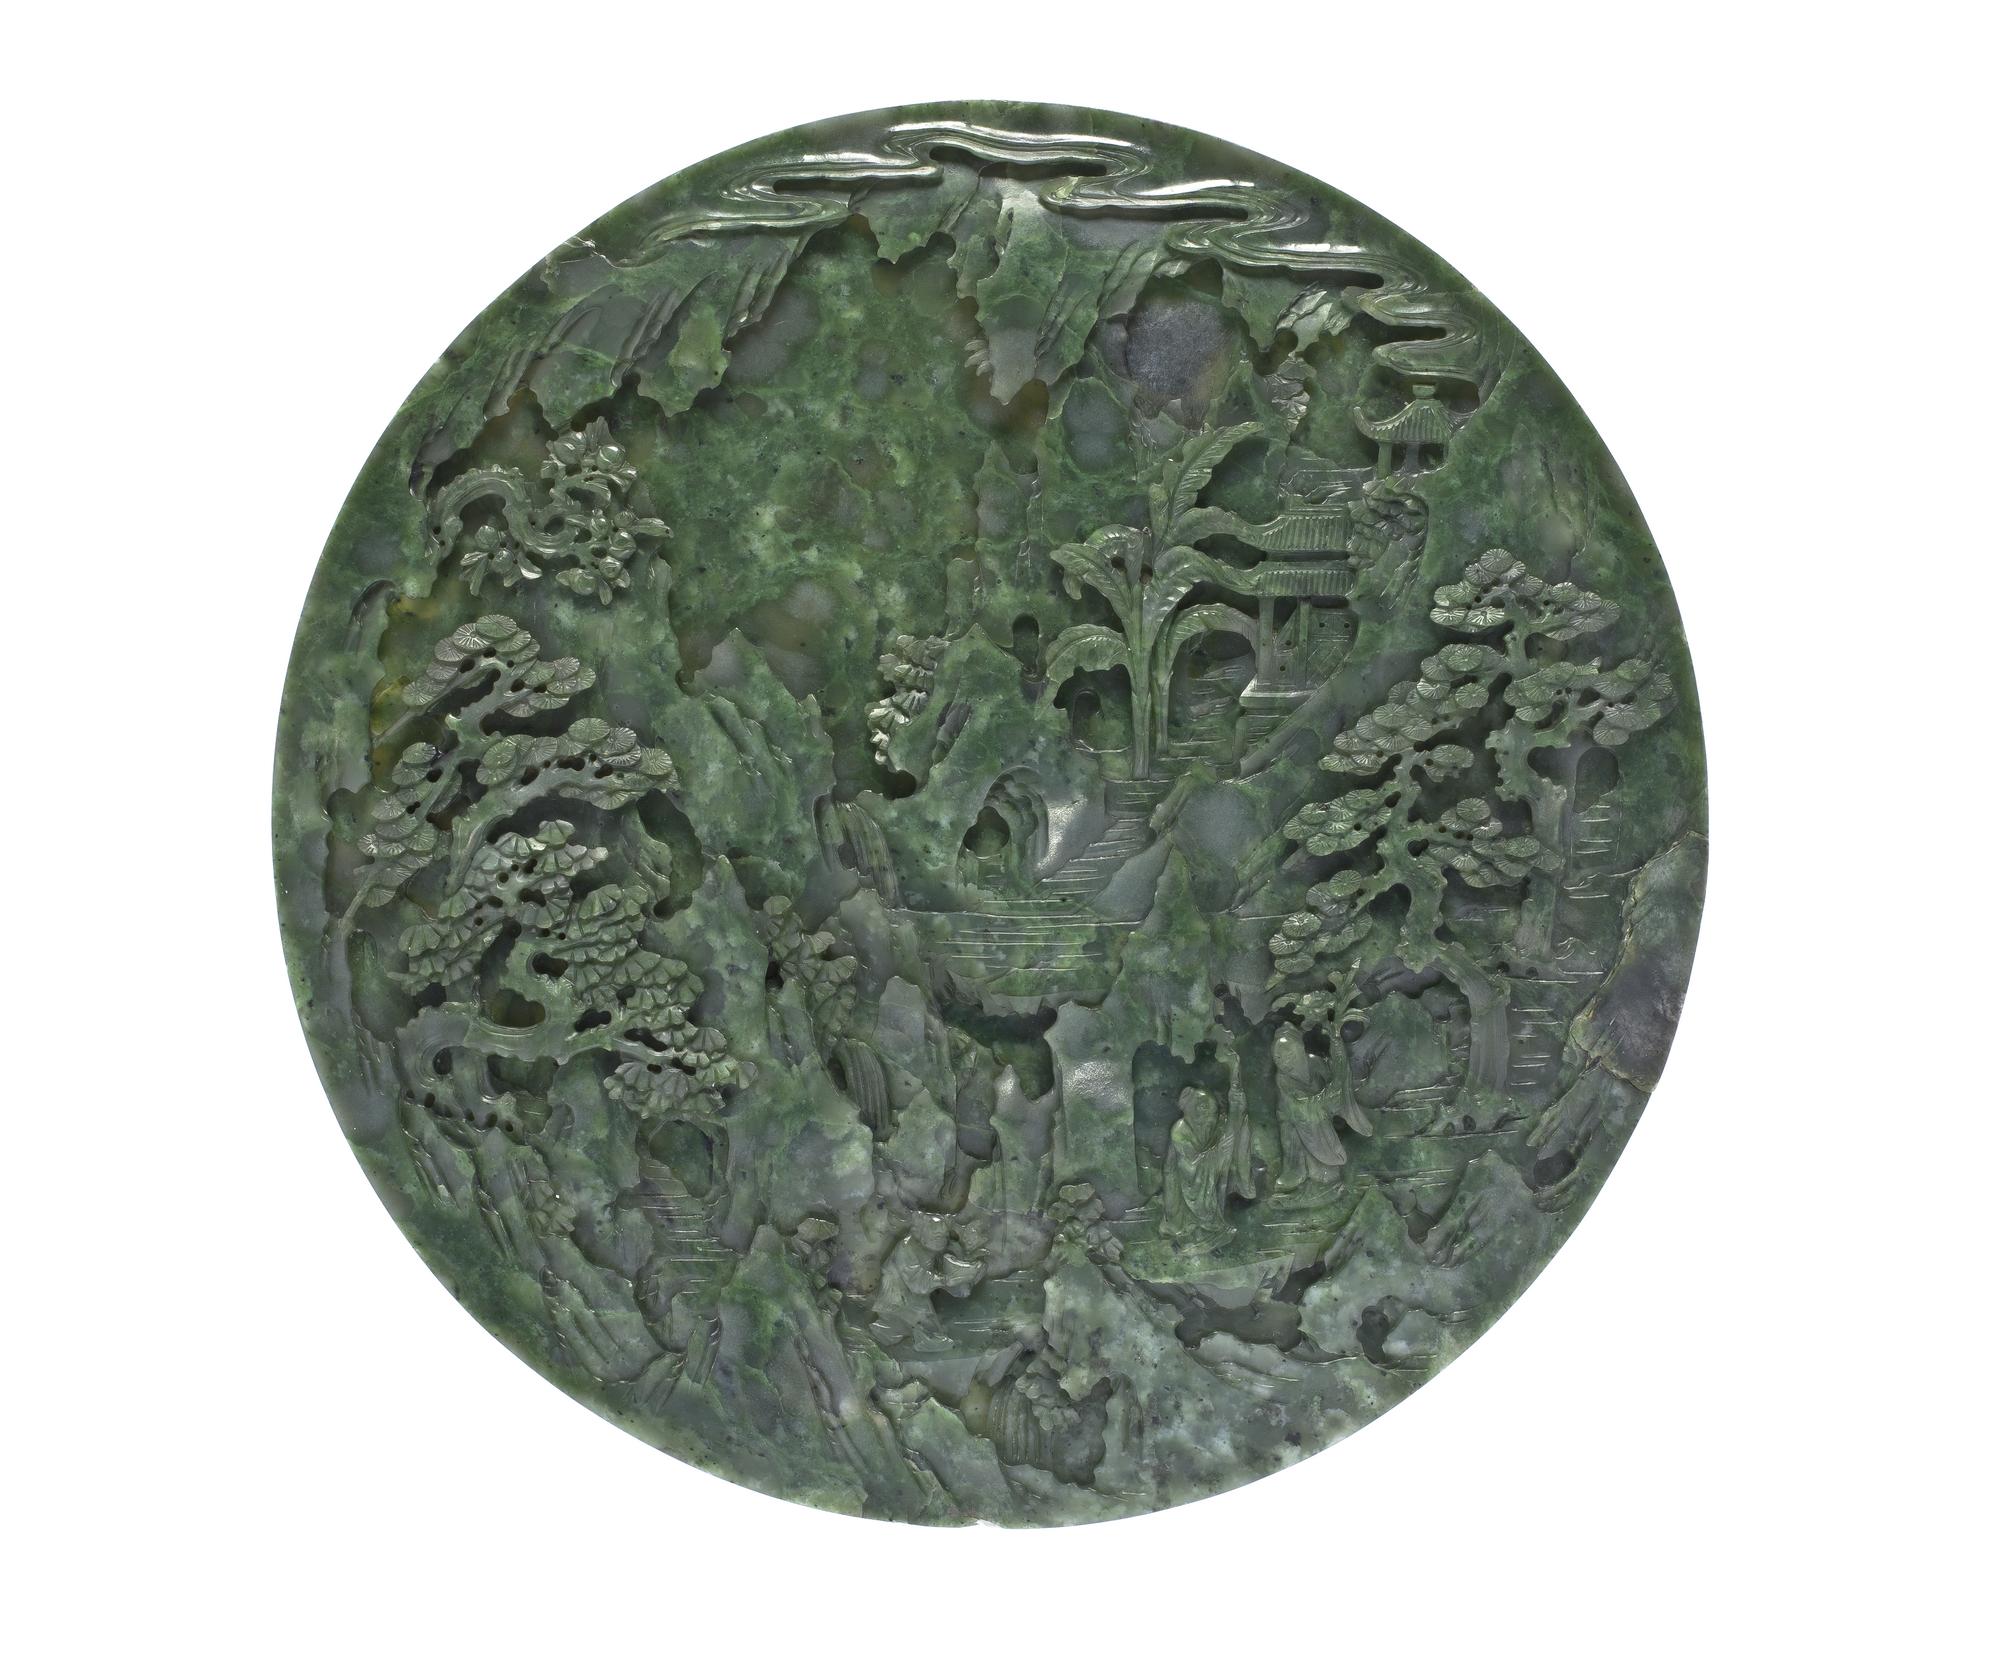 Circular table screen (yuan pingfeng) of dark green jade, carved on one side with two Daoist immortals and an attendant carrying offerings, and on the other a landscape: China, Qing Dynasty, 18th century AD.